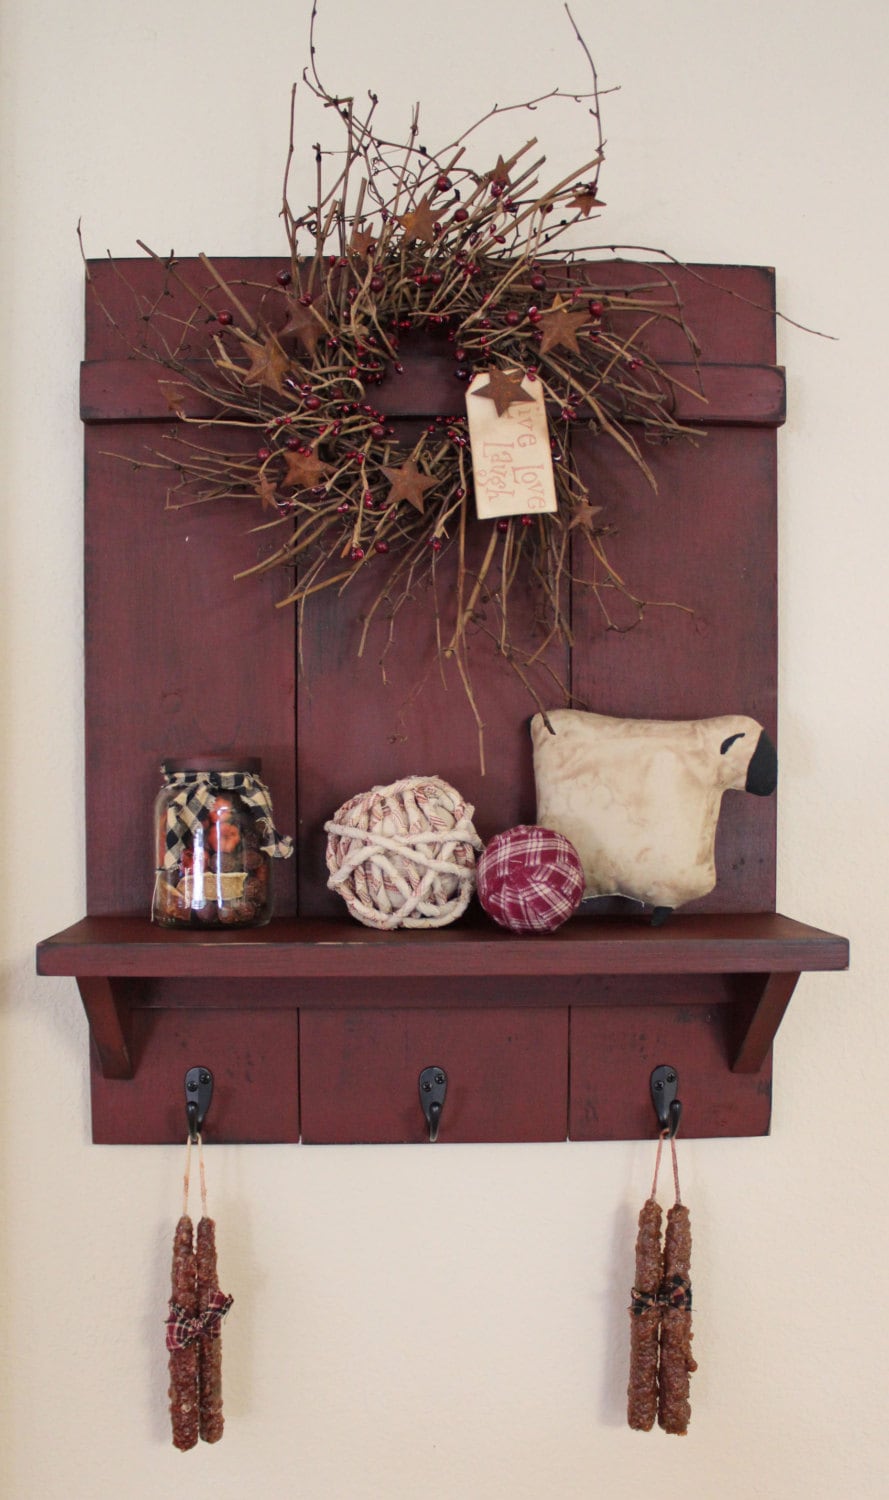 Handmade Primitive Country Distressed Wall Shelf with 3 Rubbed on What To Put On Decorative Wall Sconces Shelves id=62860